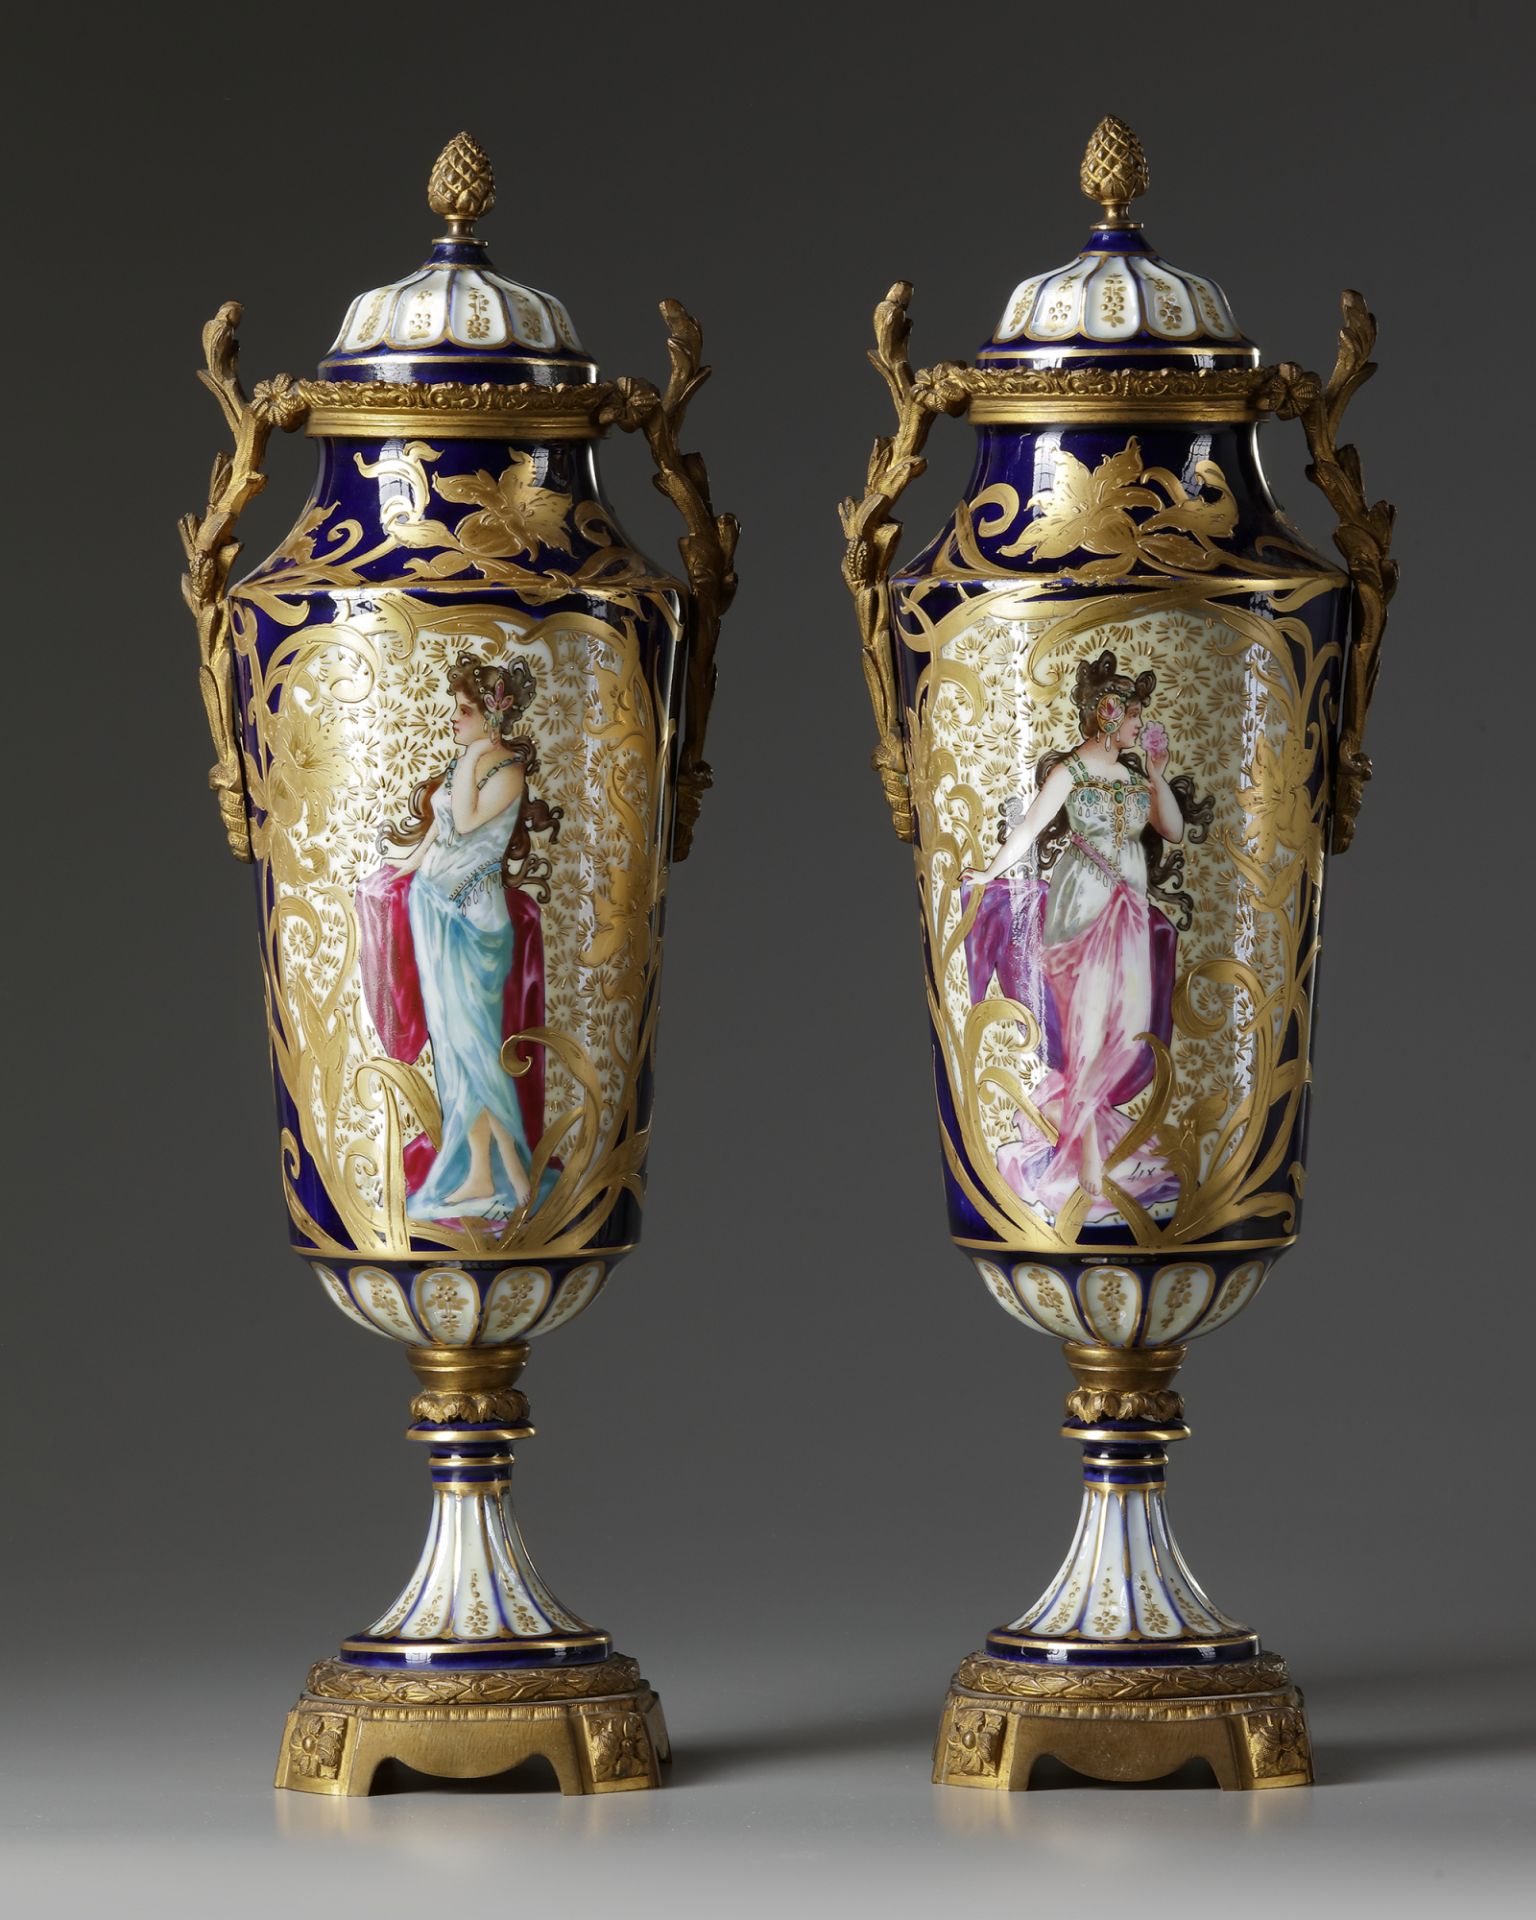 A PAIR OF ART NOUVEAU STYLE VASES, LATE 19TH CENTURY